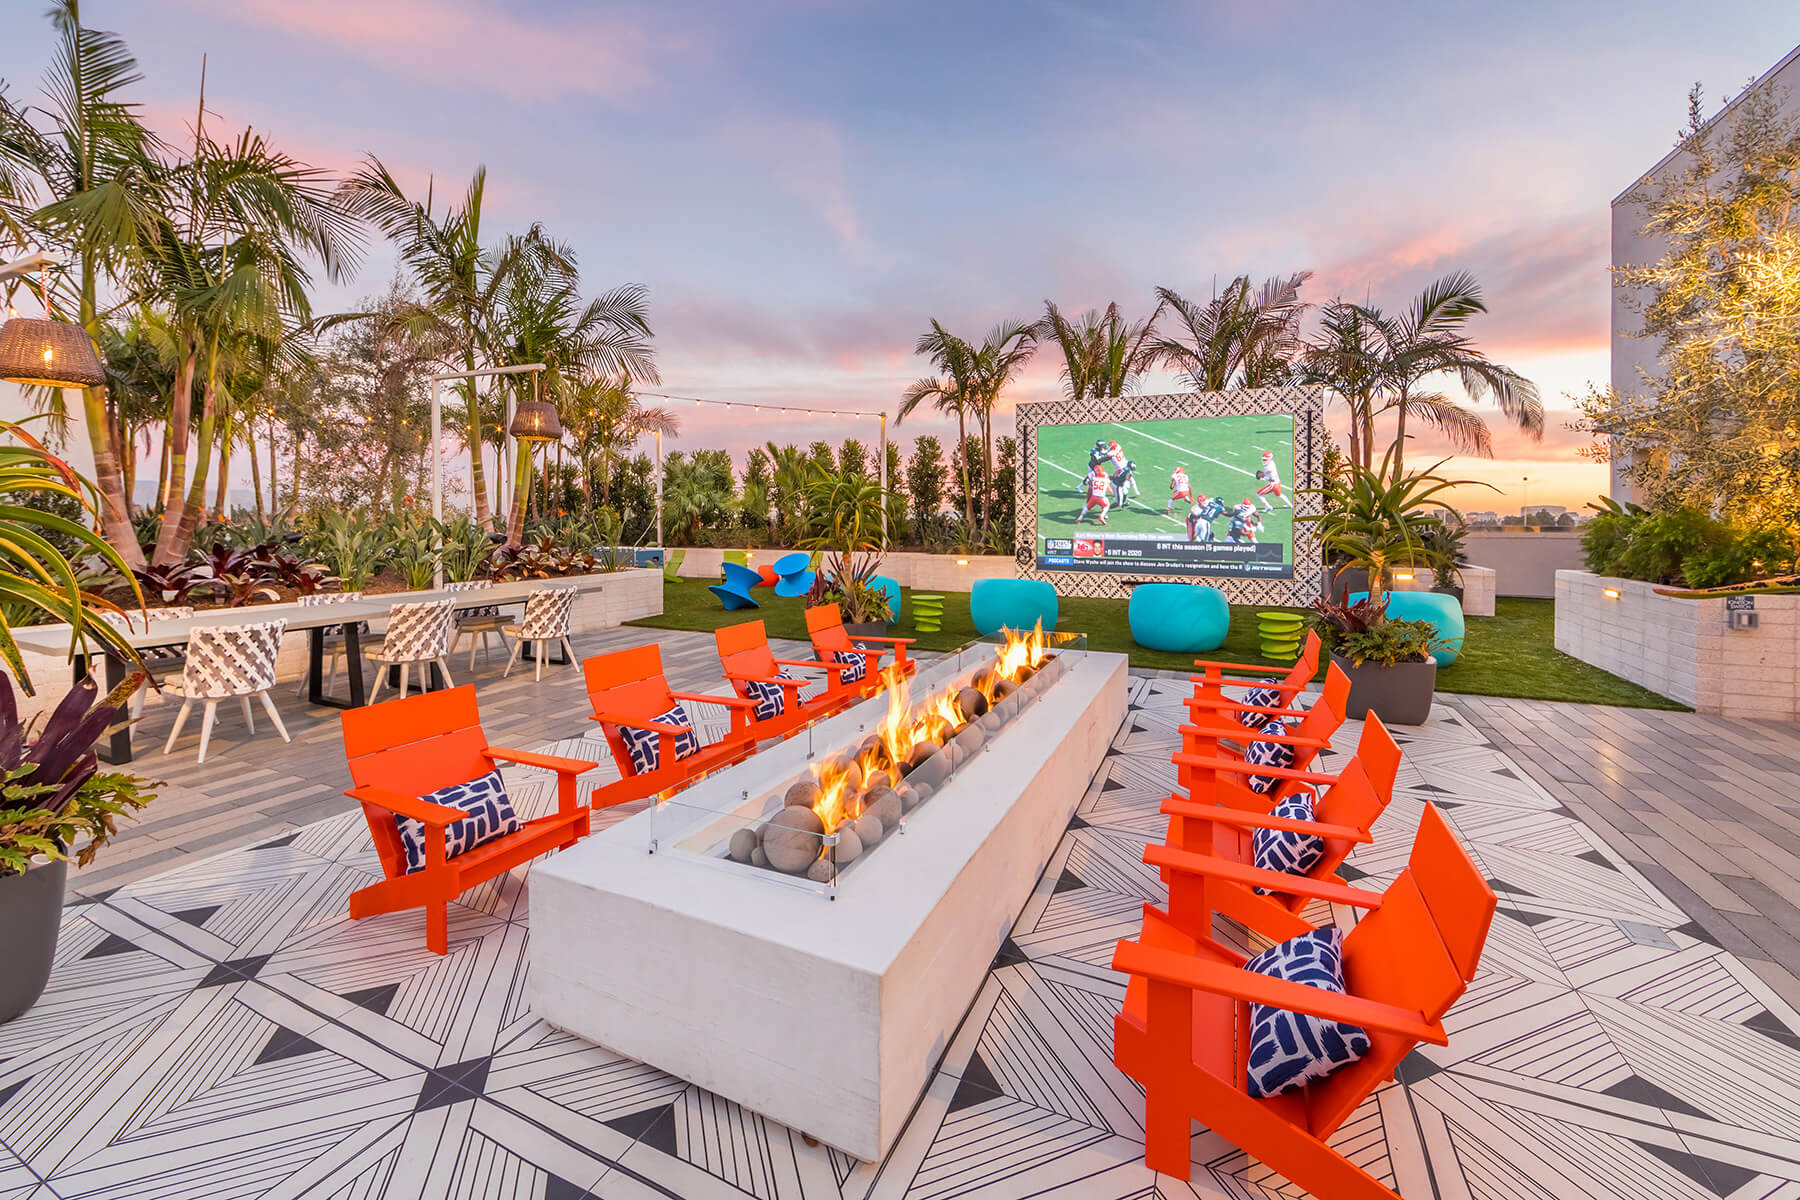 The rooftop terrace fire pit and outdoor movie screen at the Vita Apartment Homes in Orange, California.